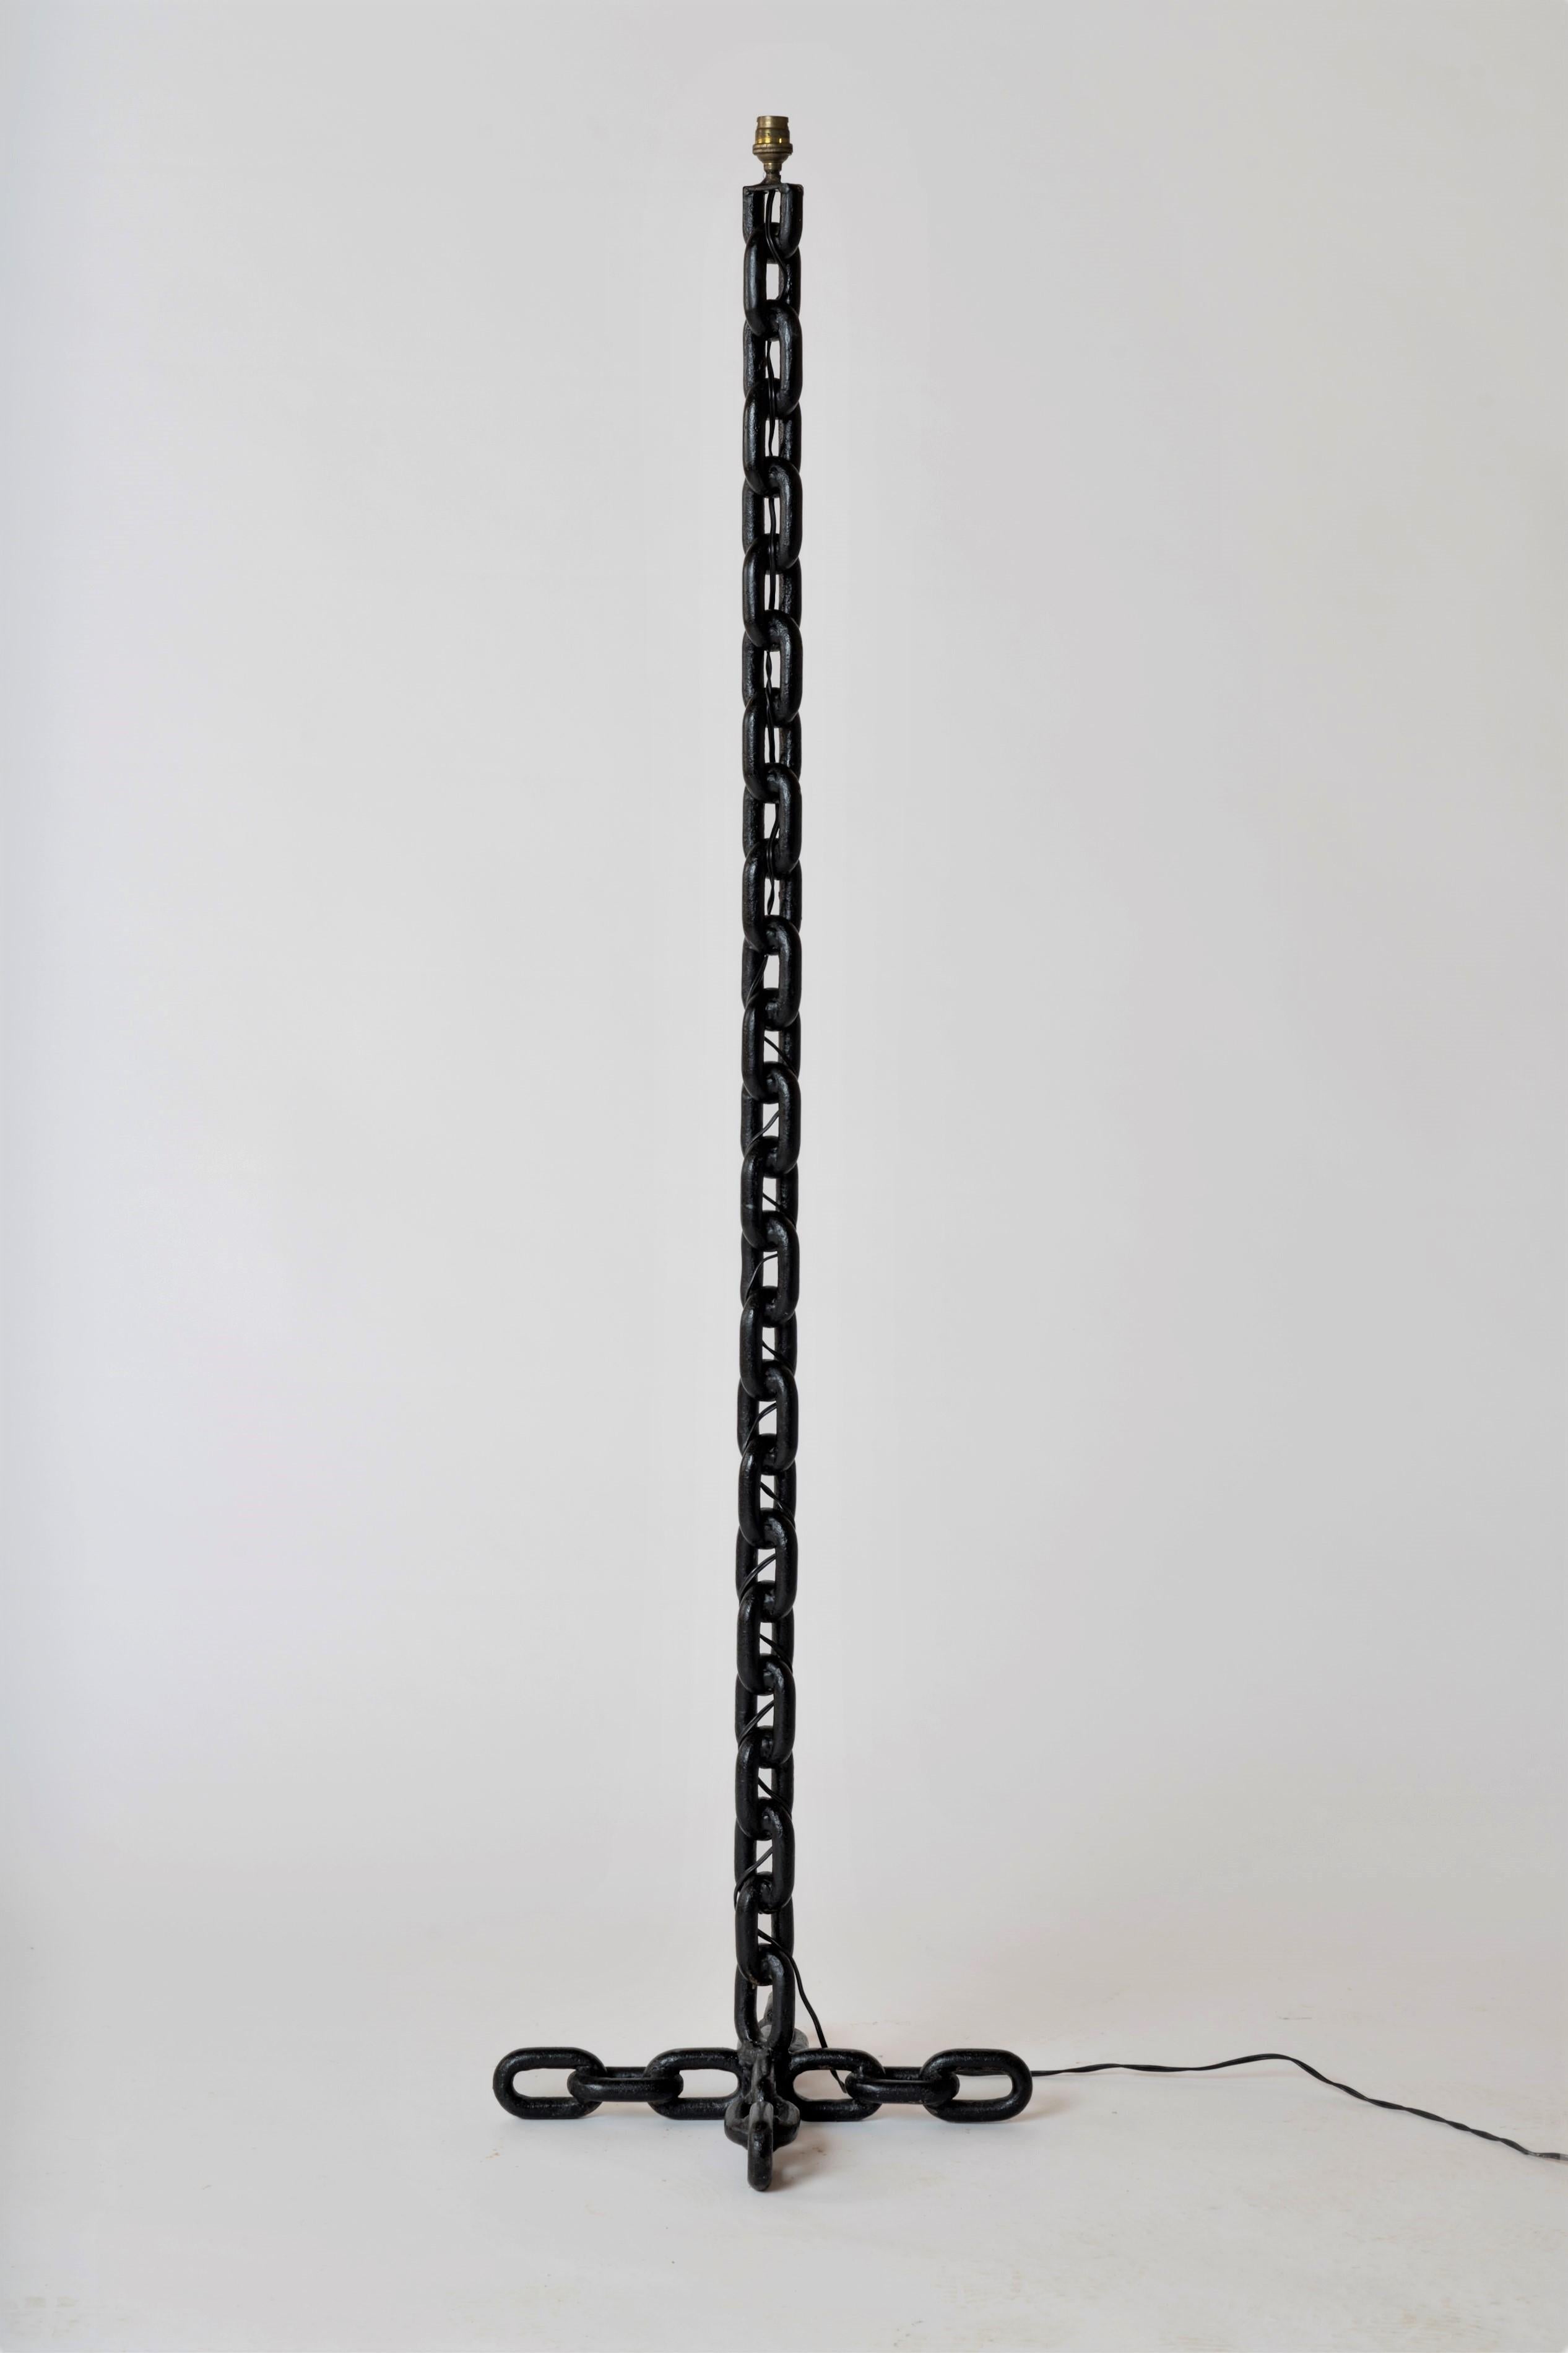 Brutalist marine chain floor lamp in the style of Franz West. Elegant cross shaped foot. European socket and wiring. Heavy and sturdy. In good vintage condition.
This lamp will ship from France and can be returned to either France or to an LIC NY